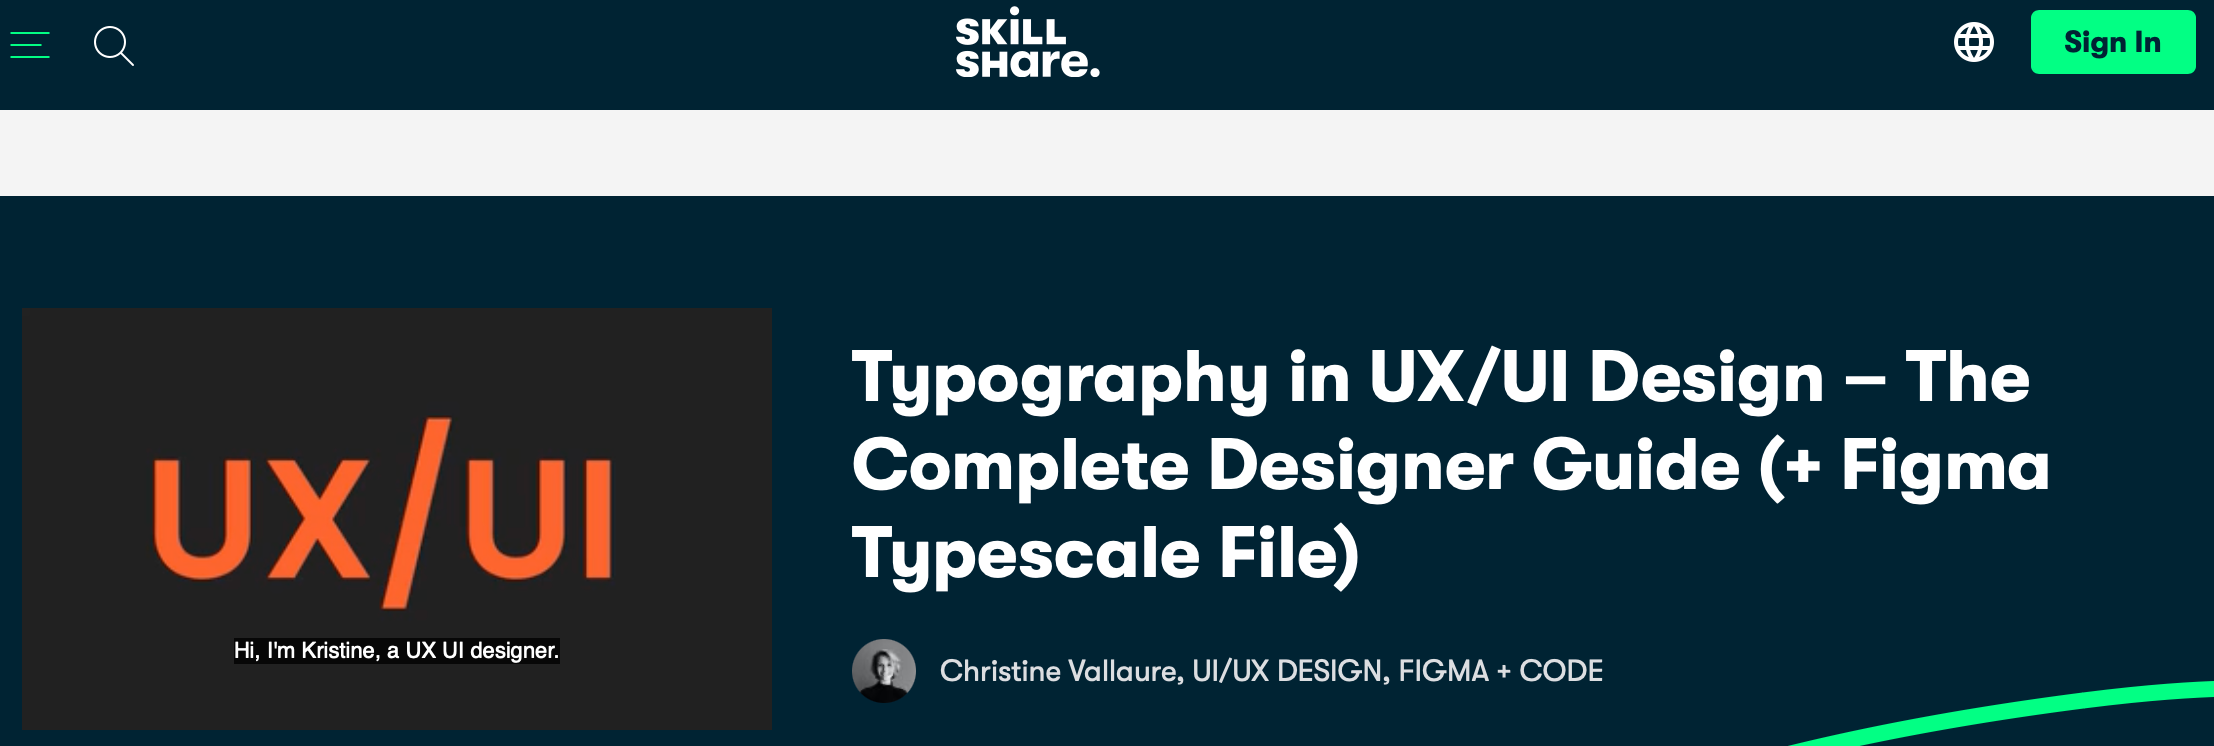 Typography in UI:UX Design - The Complete Designer Guide